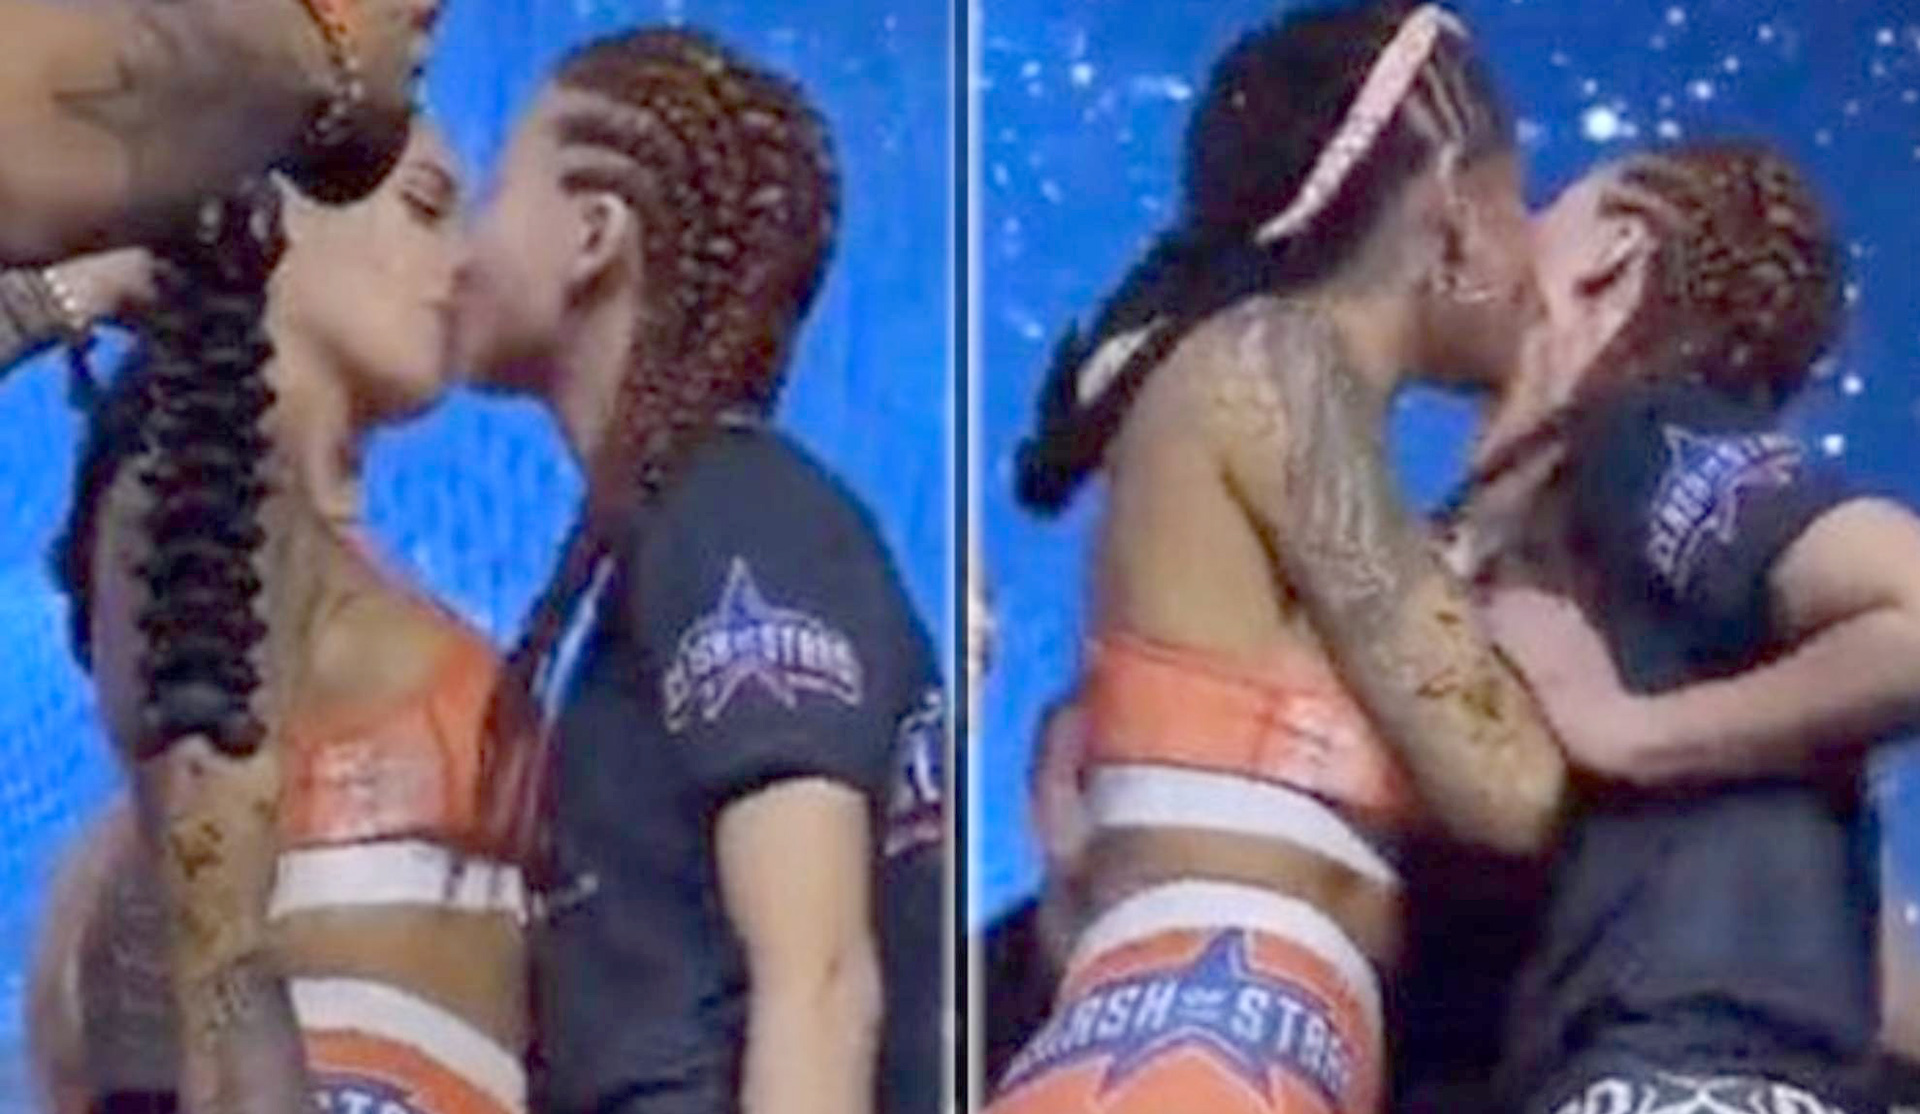 MMA Two female fighters kiss each other on the mouth before their MMA bout Marca pic